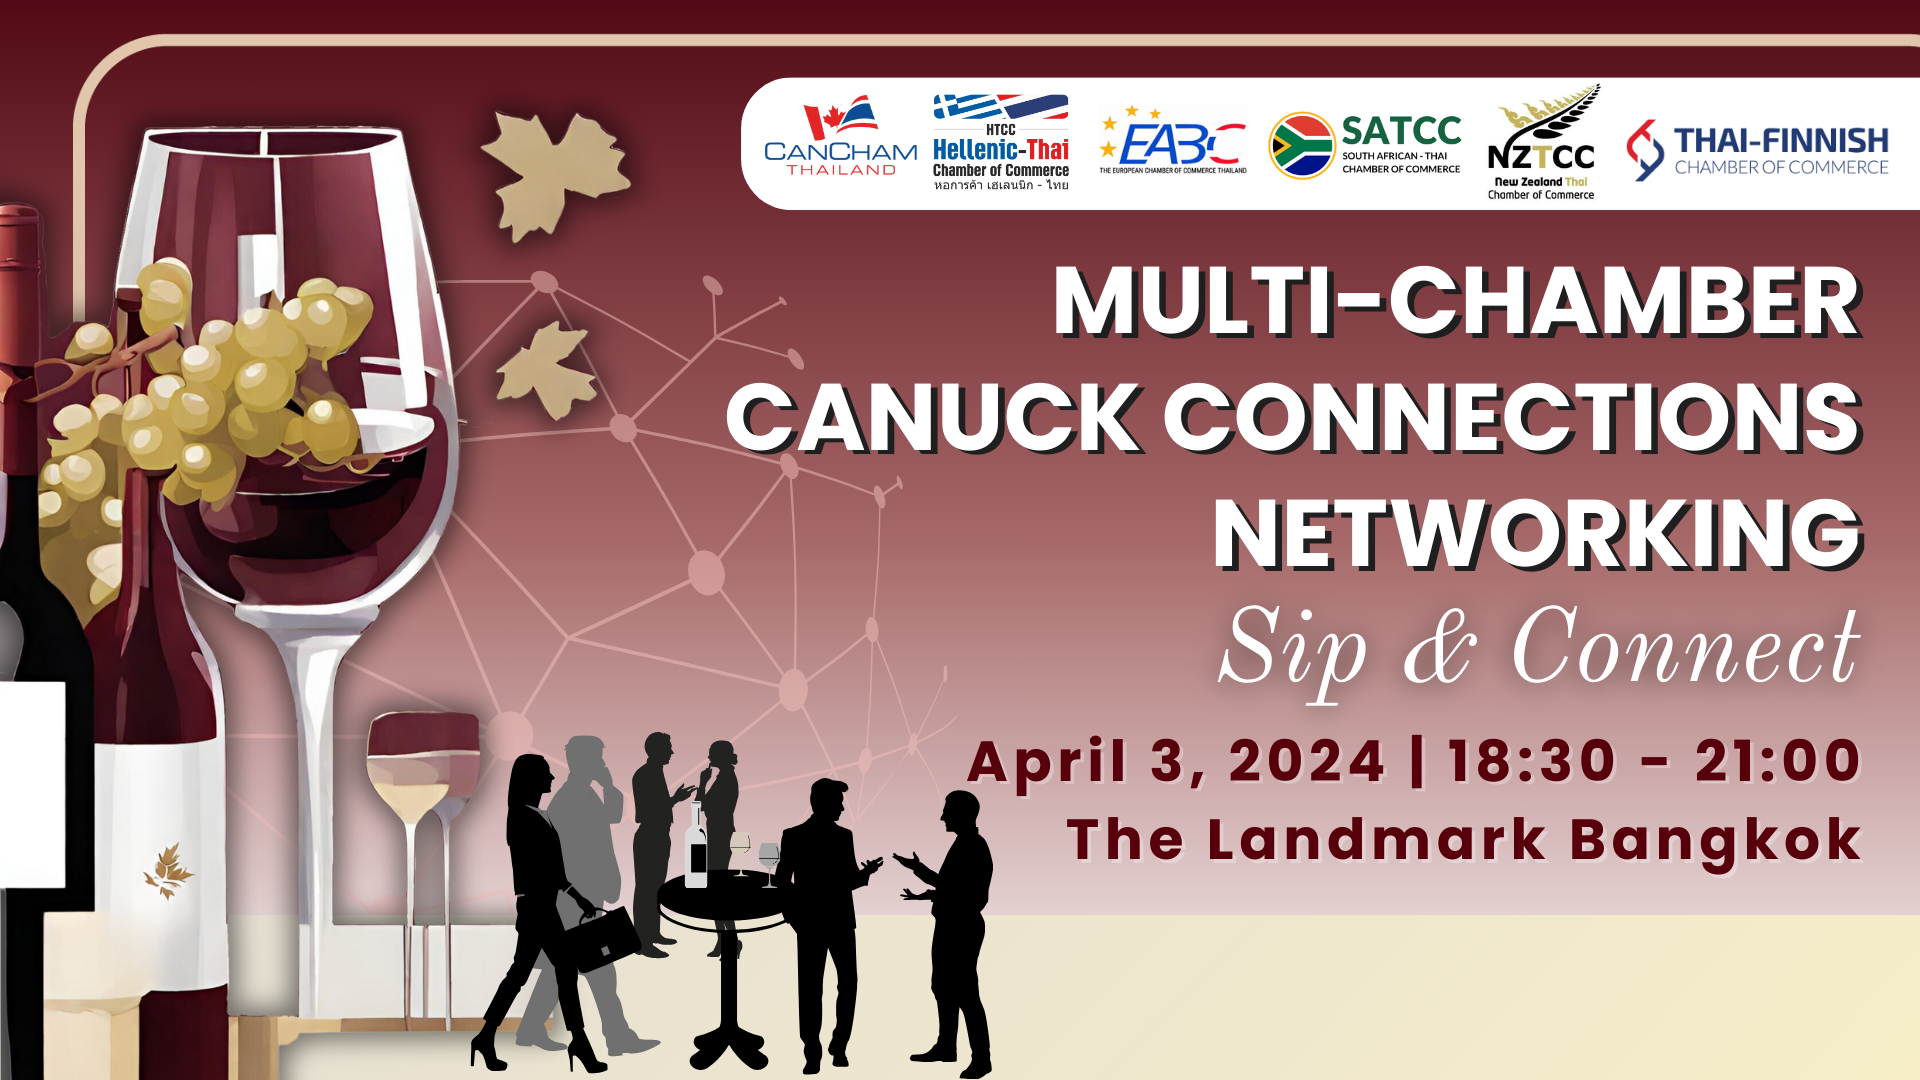 Multi-Chamber Canuck Connections Networking: Sip & Connect